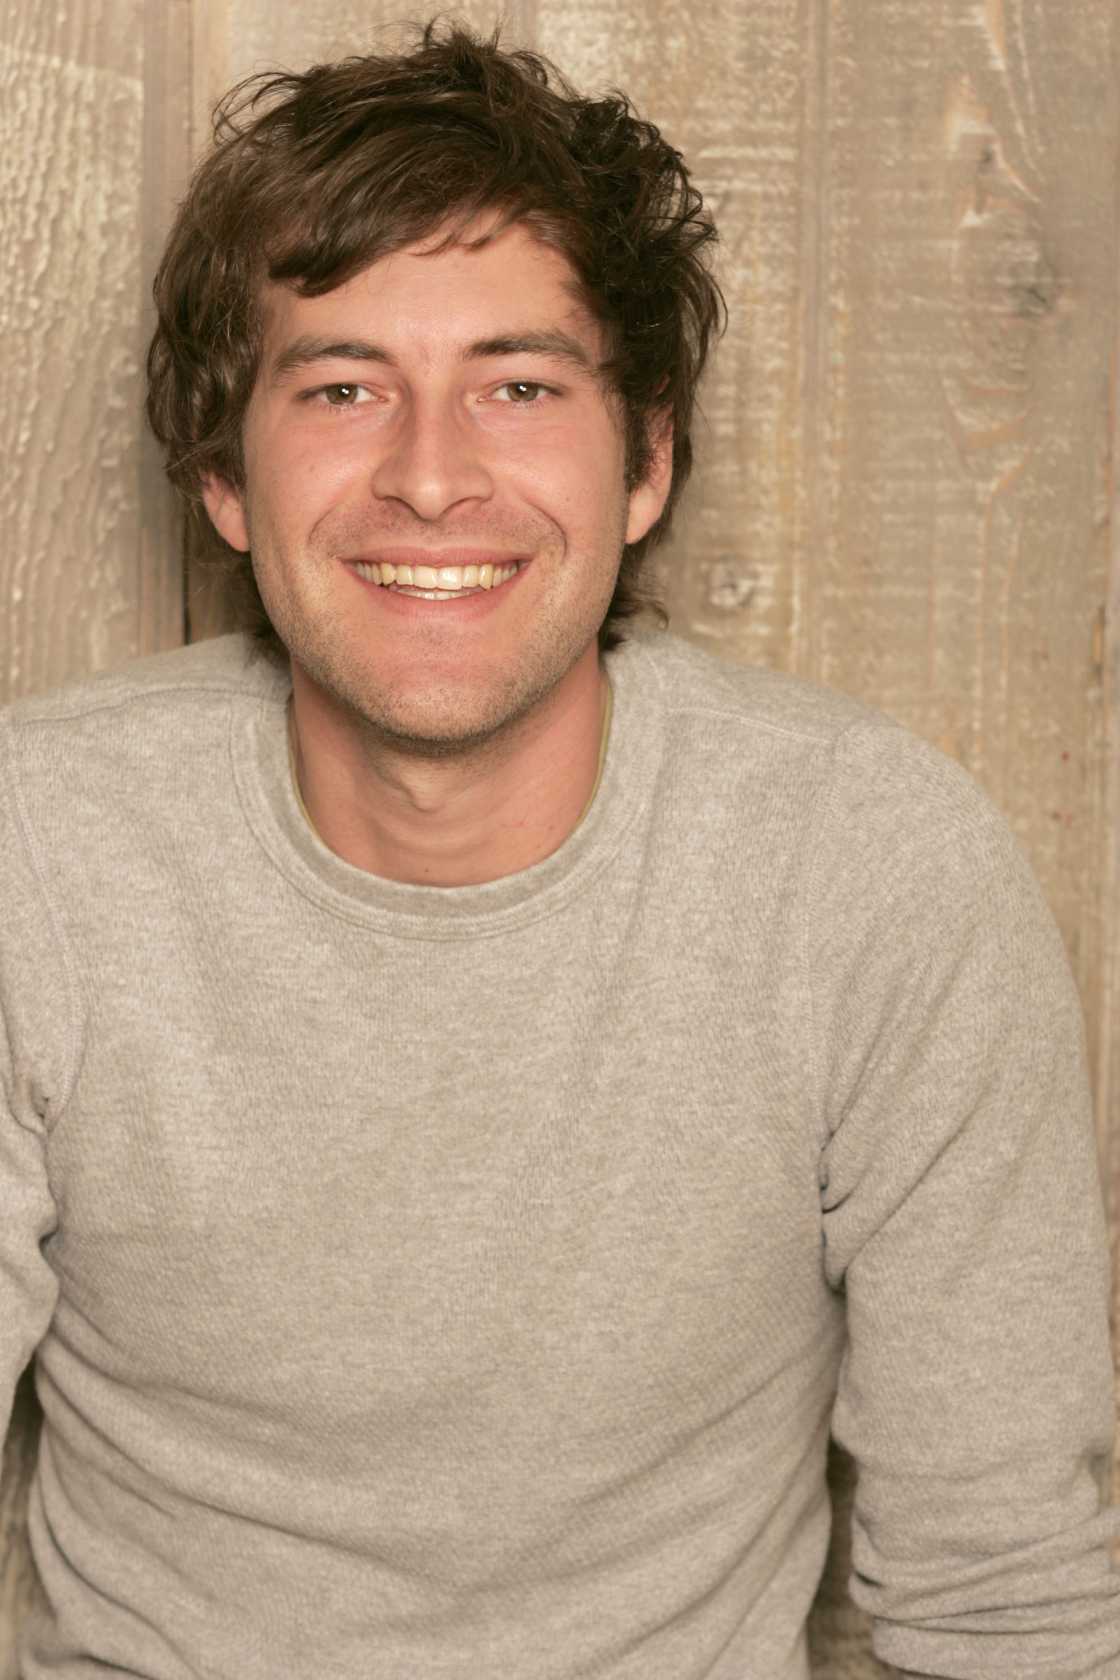 I’m not calling him ugly by any means, but actor Mark Duplass isn’t exactly...